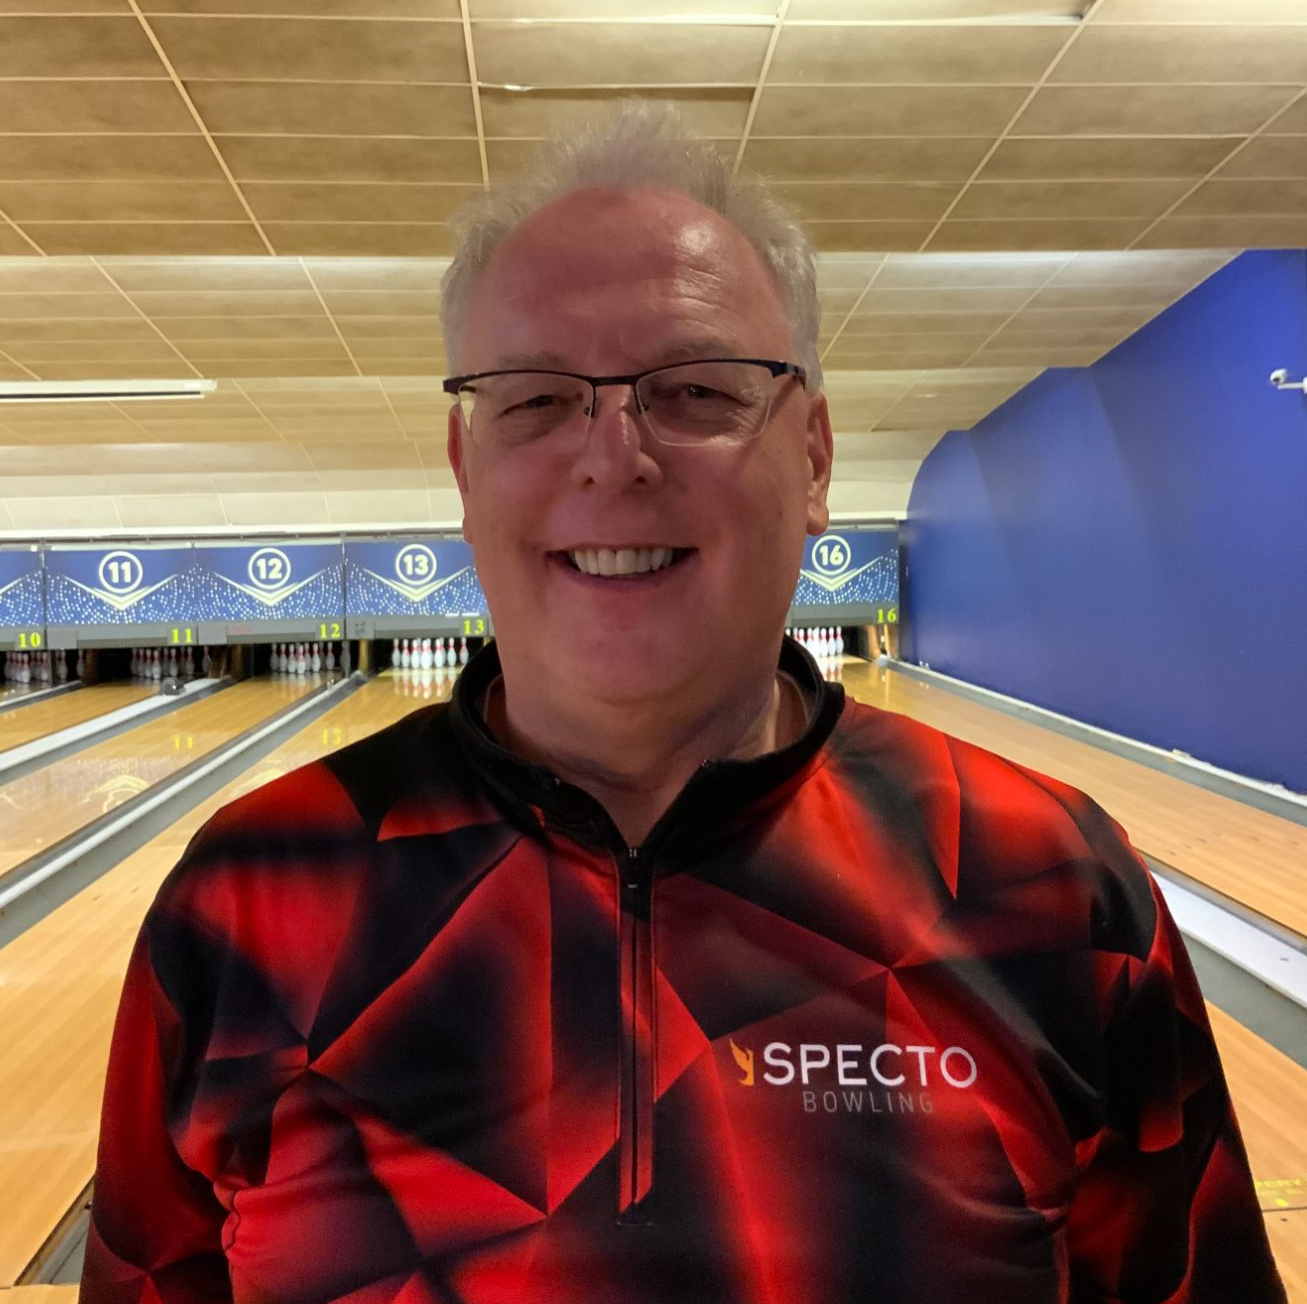 Andy Penny - ETBF Level 3  and USBC Gold Ten pin Bowling Coach